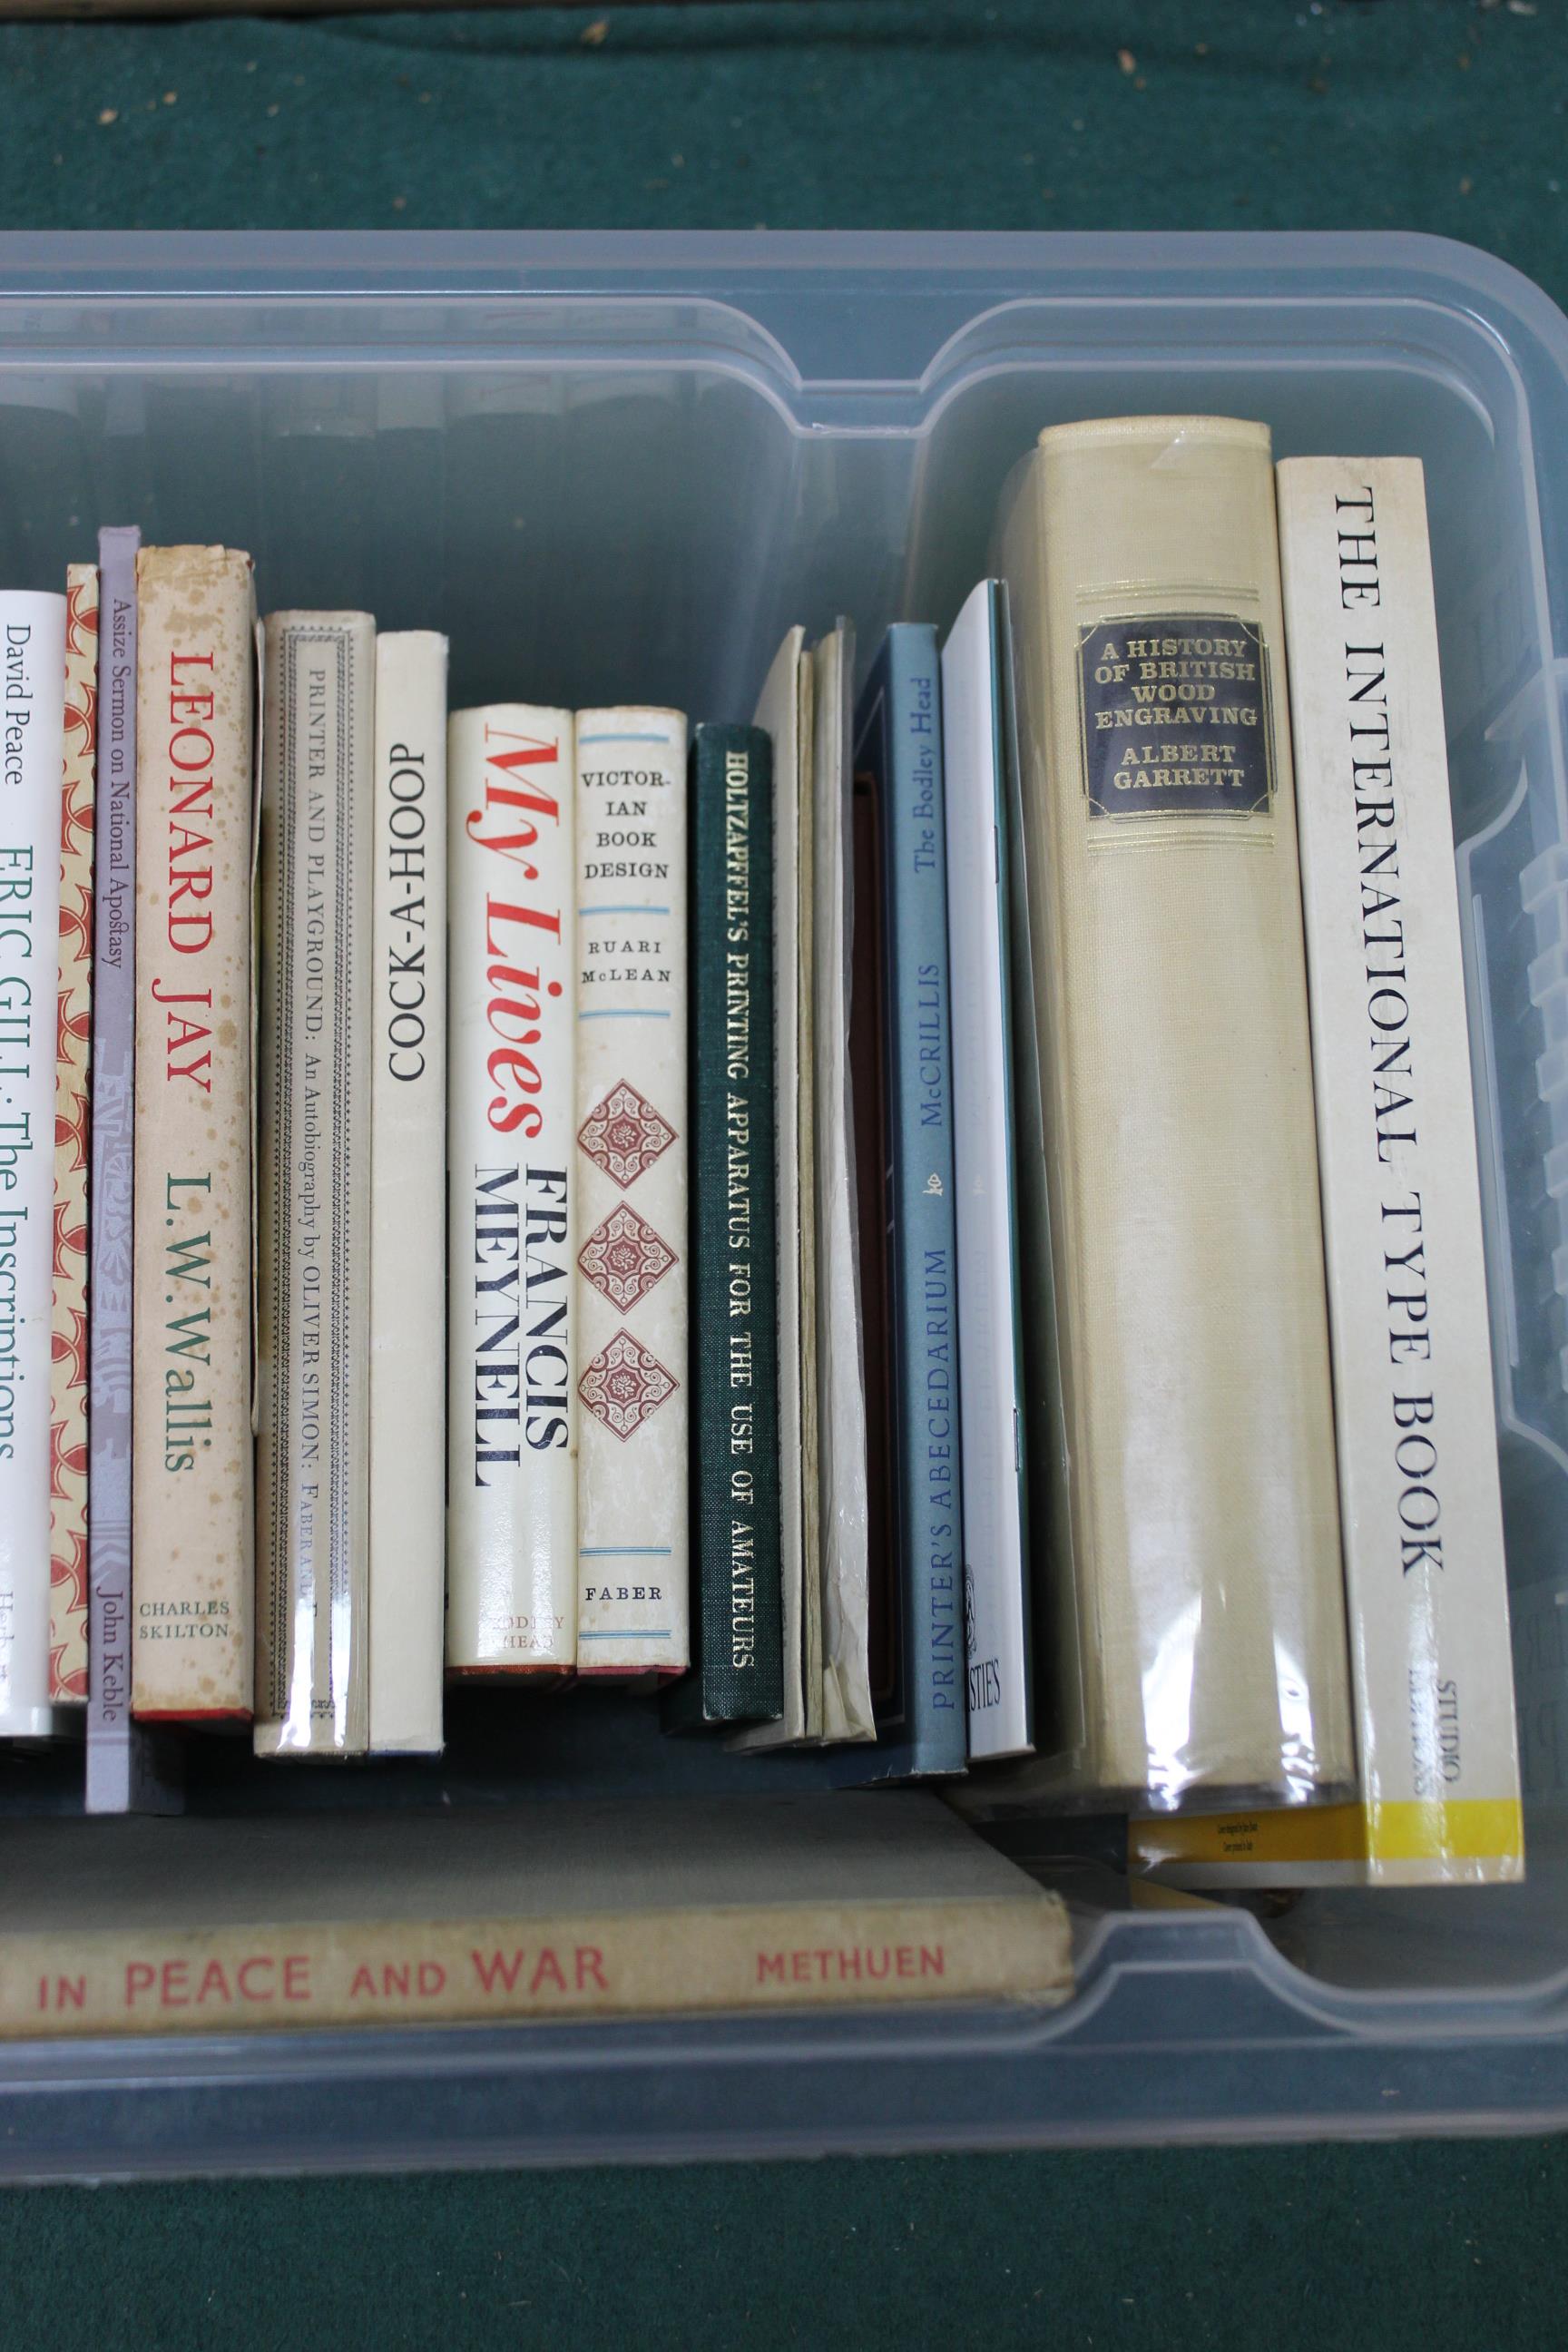 A box of books, subjects including printing, design, - Image 3 of 3